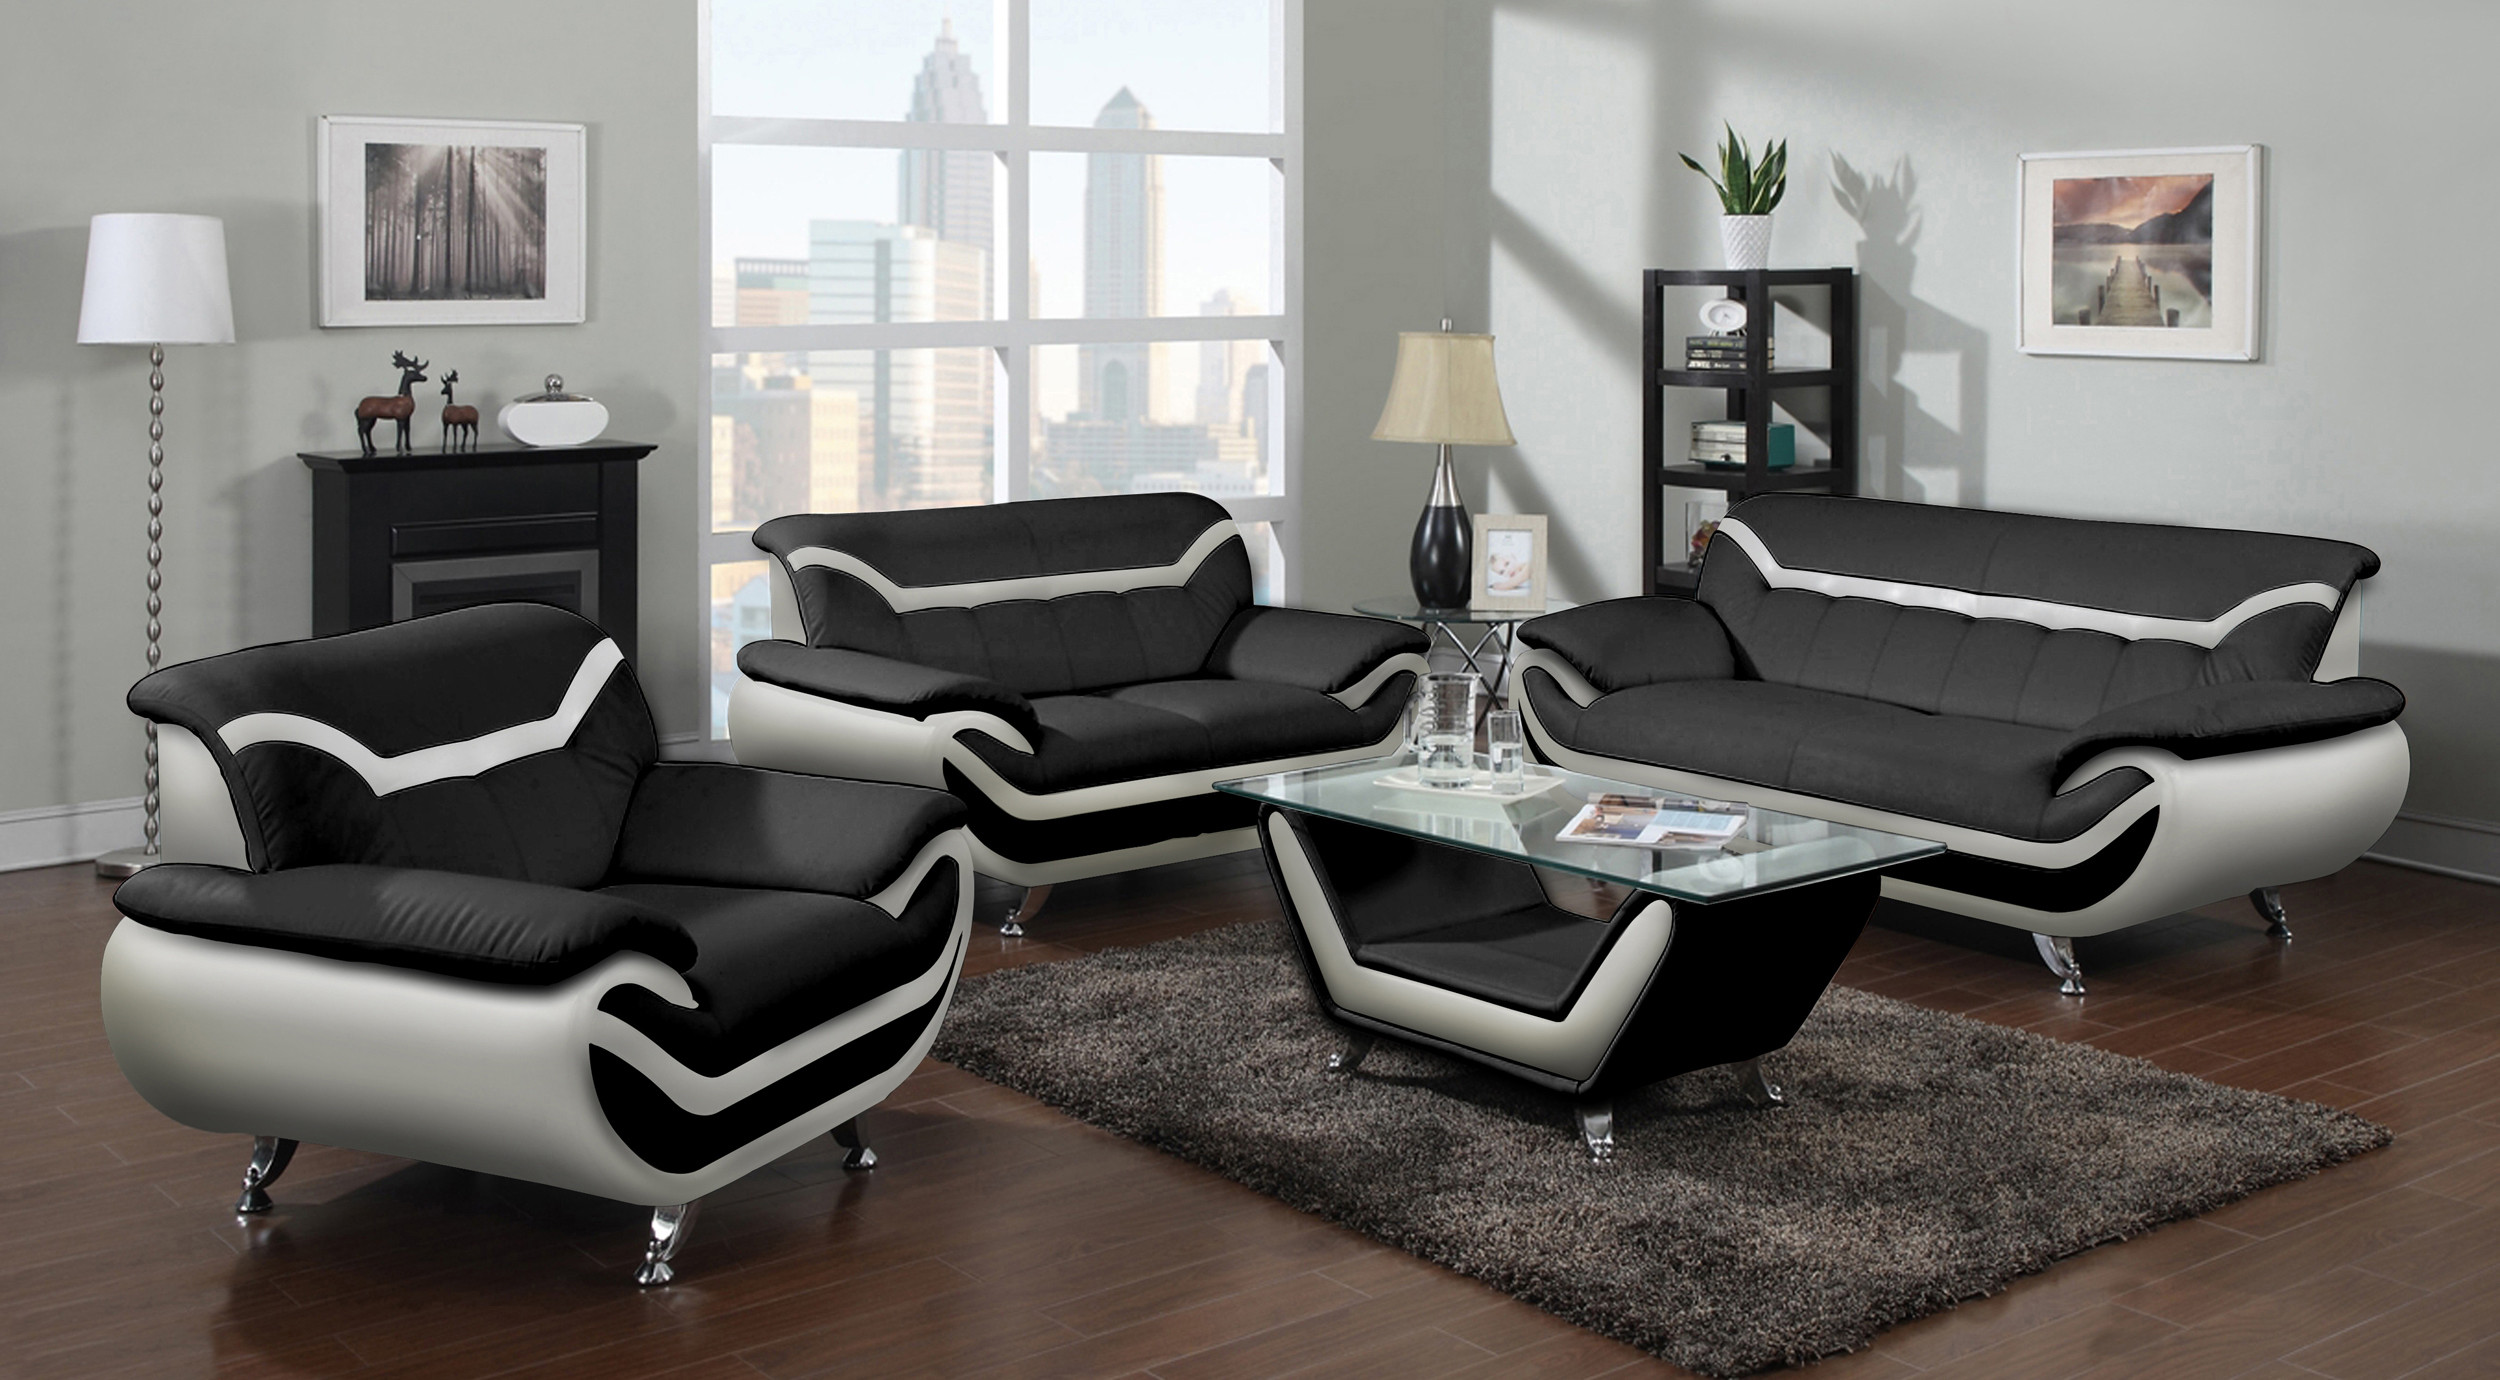 Modern Living Room Set
 715L Black and White Leather Contemporary Living Room Set